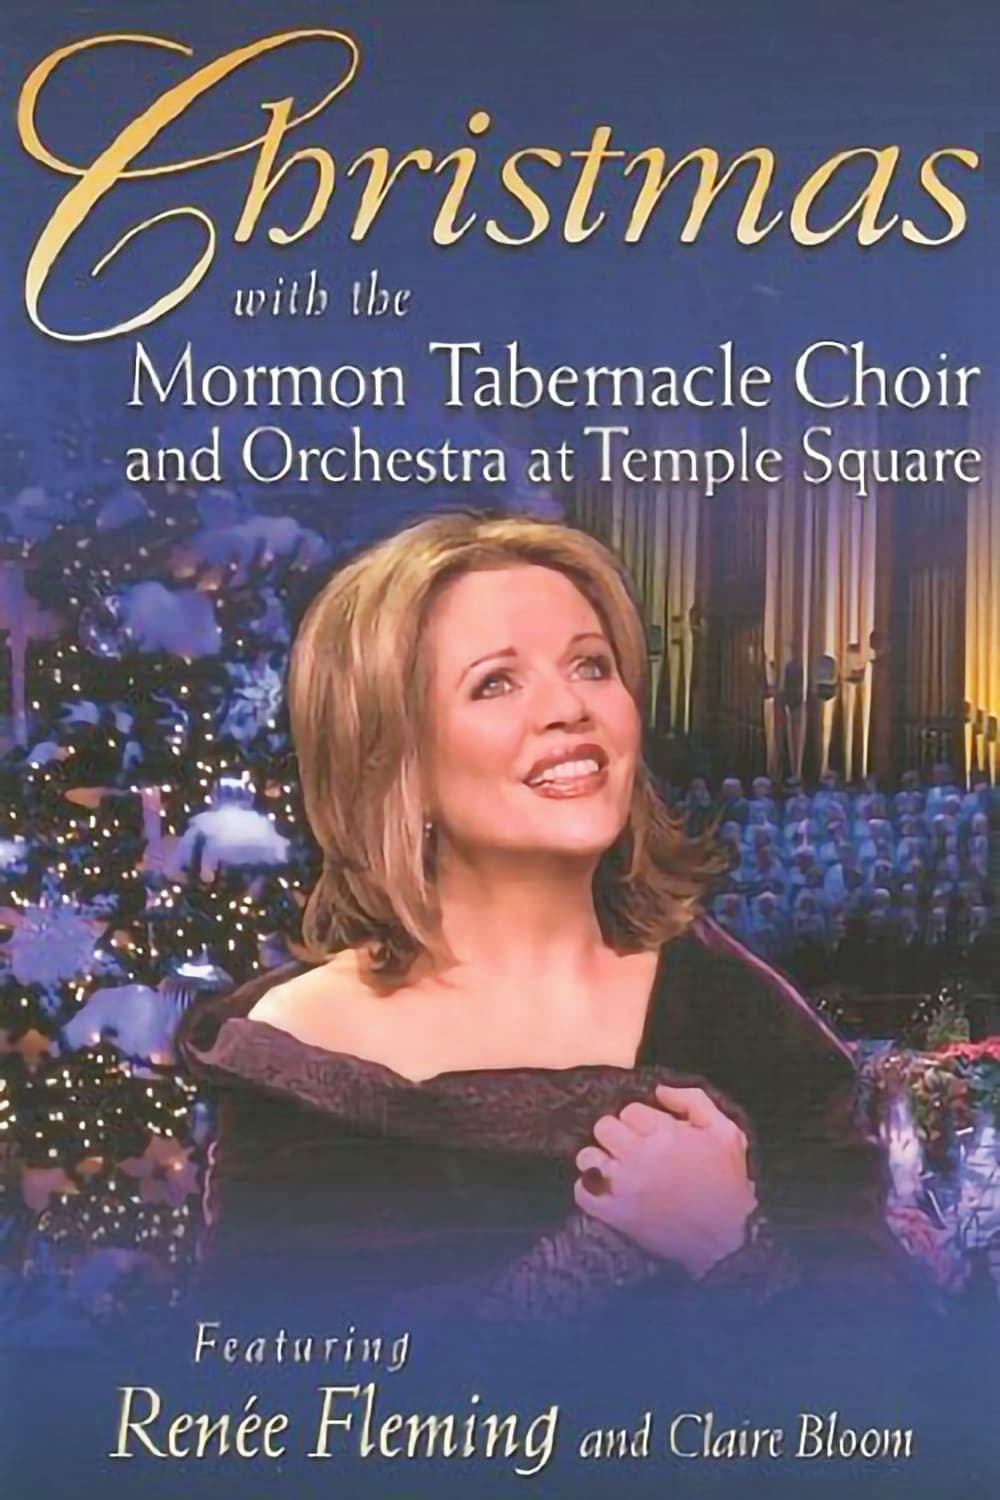 Christmas with the Mormon Tabernacle Choir and Orchestra at Temple Square featuring Renee Fleming and Claire Bloom